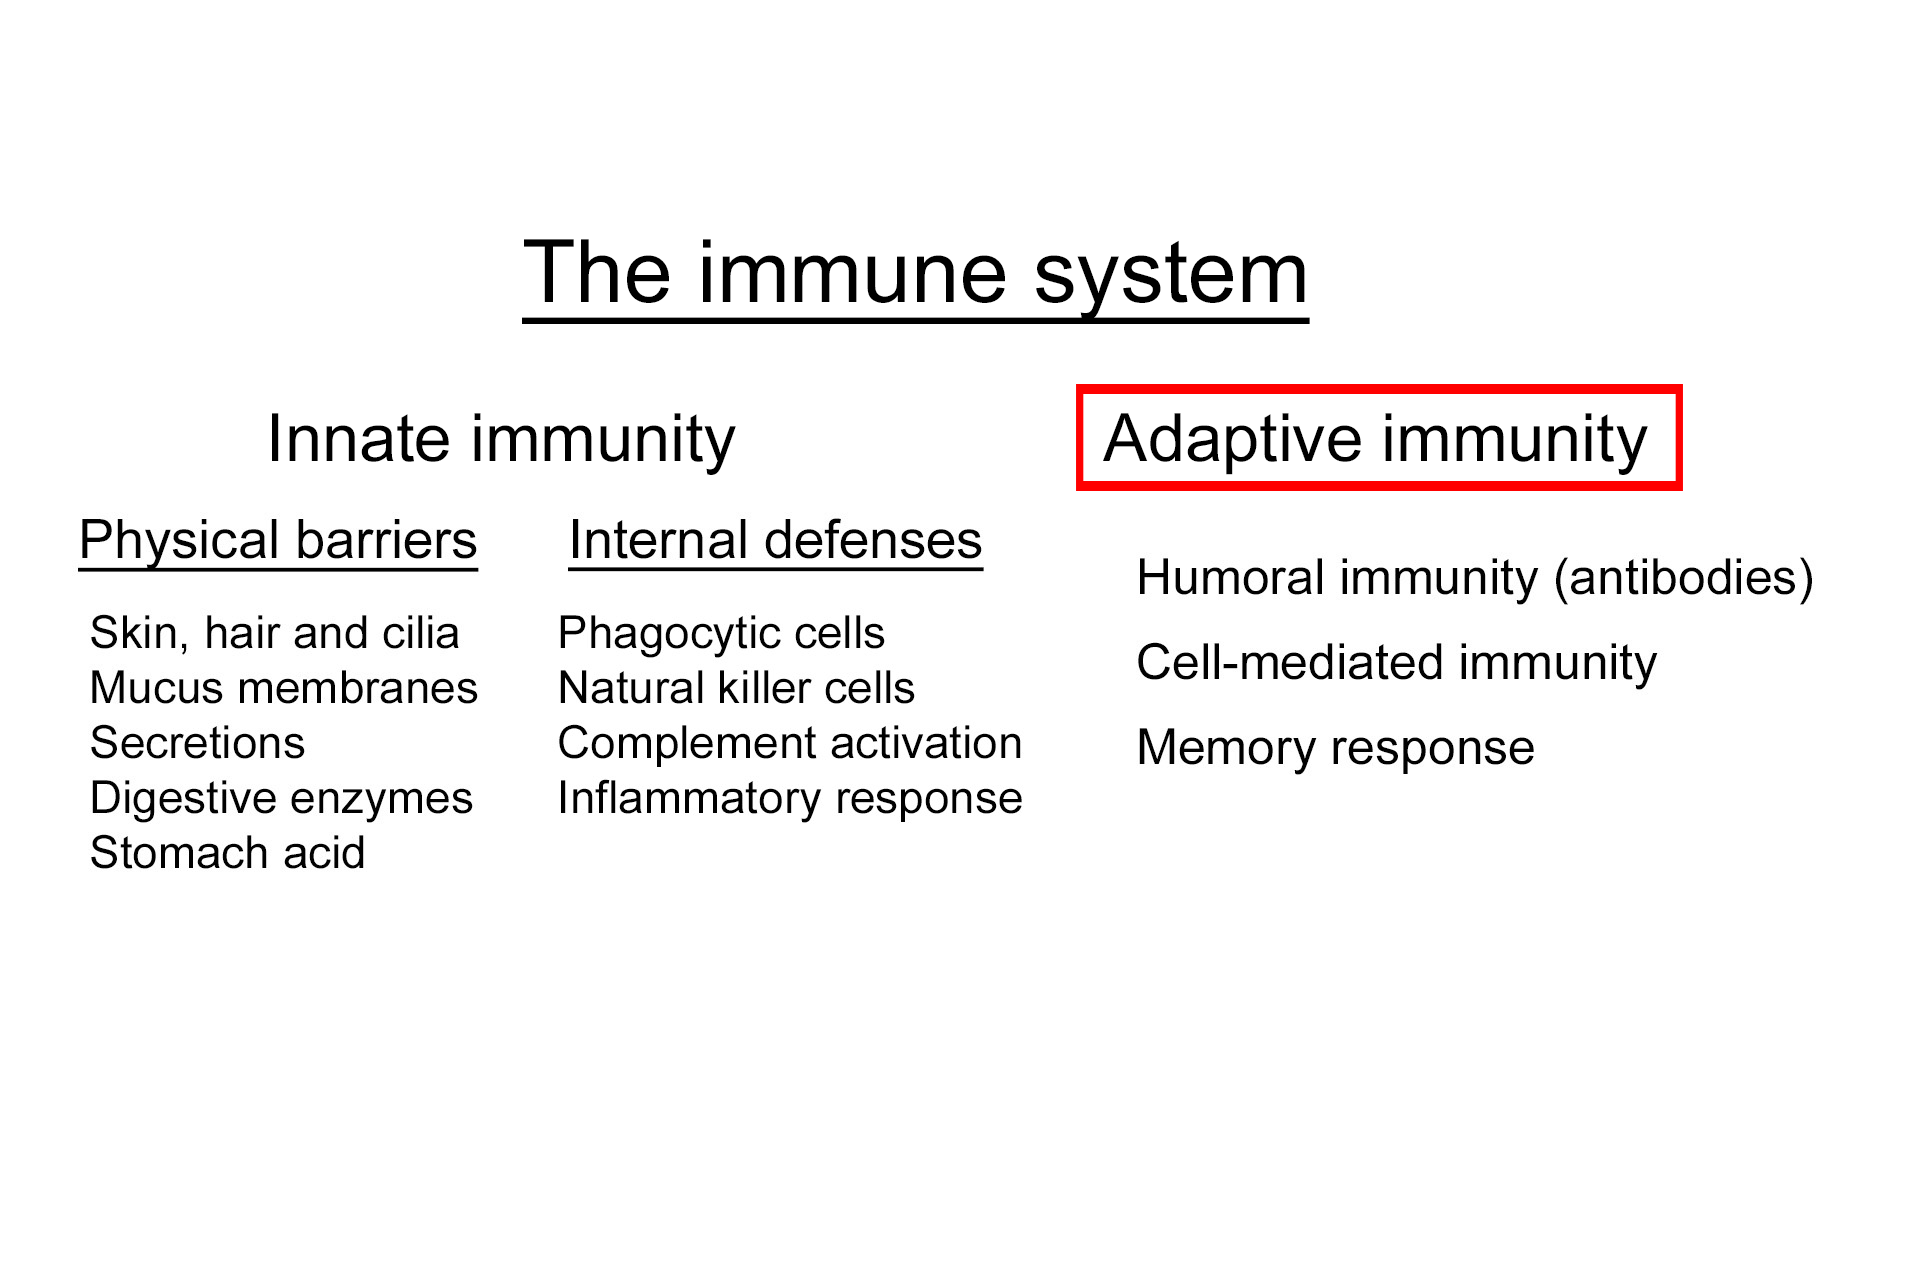  - Adaptive immunity > <p>Adaptive immunity takes longer to develop but is highly specific for a particular pathogen or toxin.  The presence of an antigen, defined as any substance capable of eliciting an adaptive immune response, leads to the activation of effector lymphocytes, B cells and T cells.  Adaptive immunity has two components, humoral and cell-mediated.</p>
